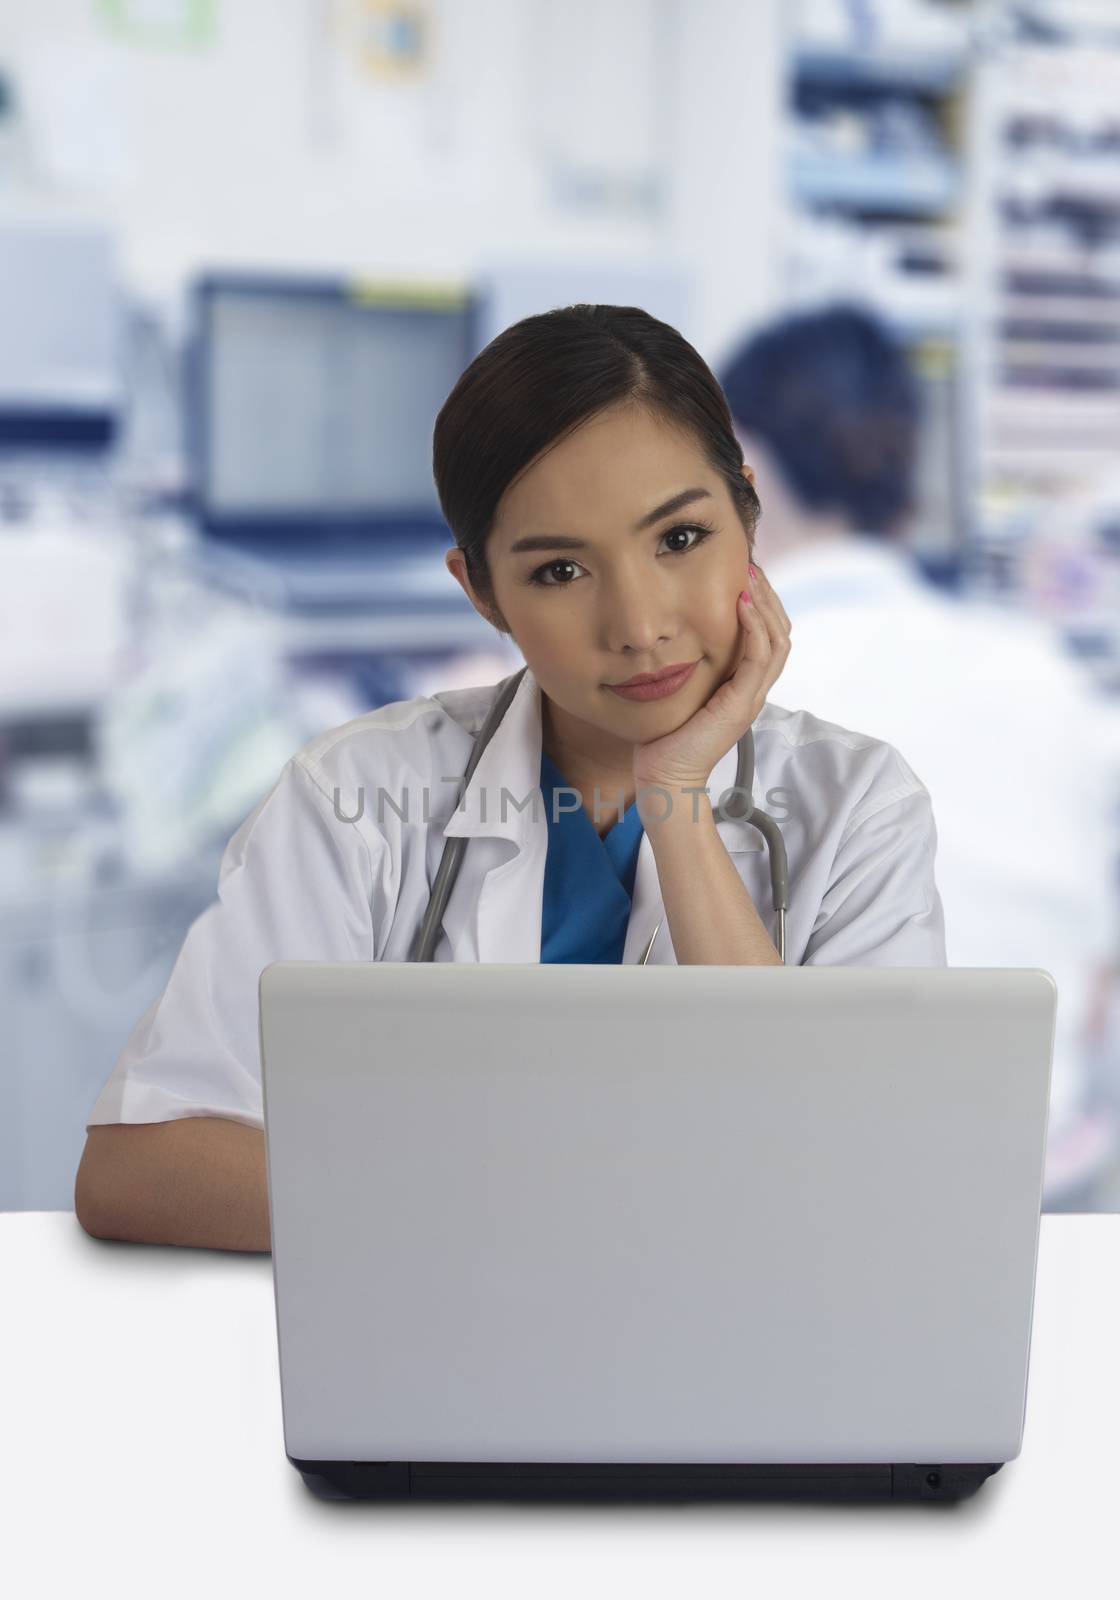 Female doctor working with laptop computer on desk in hospital. by pandpstock_002